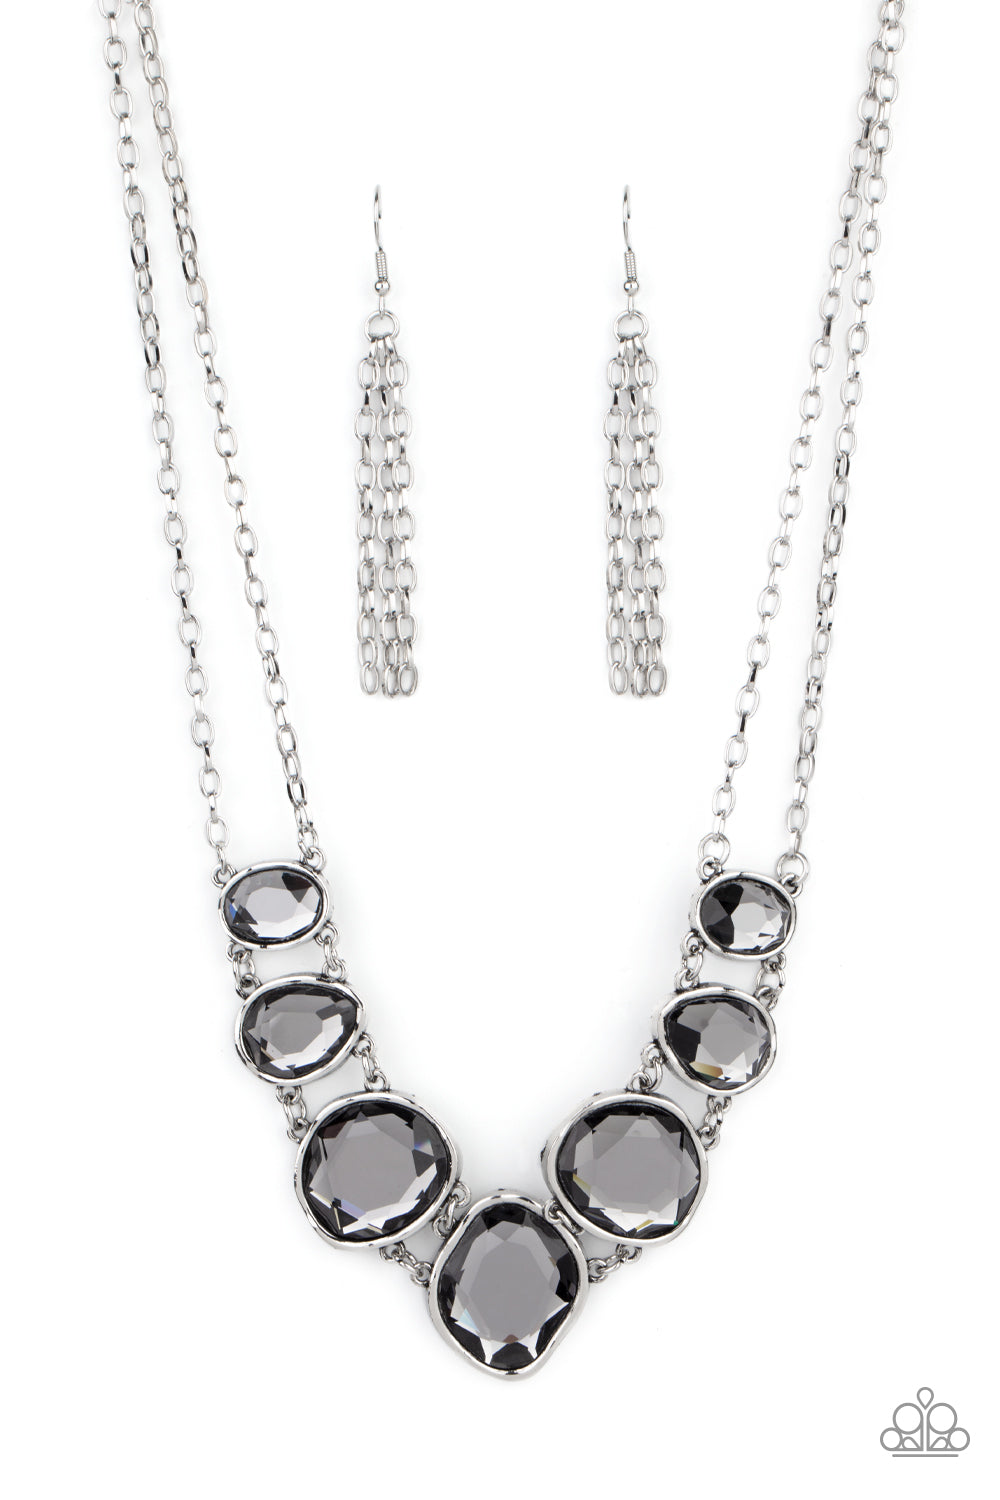 Absolute Admiration - Silver - The V Resale Boutique